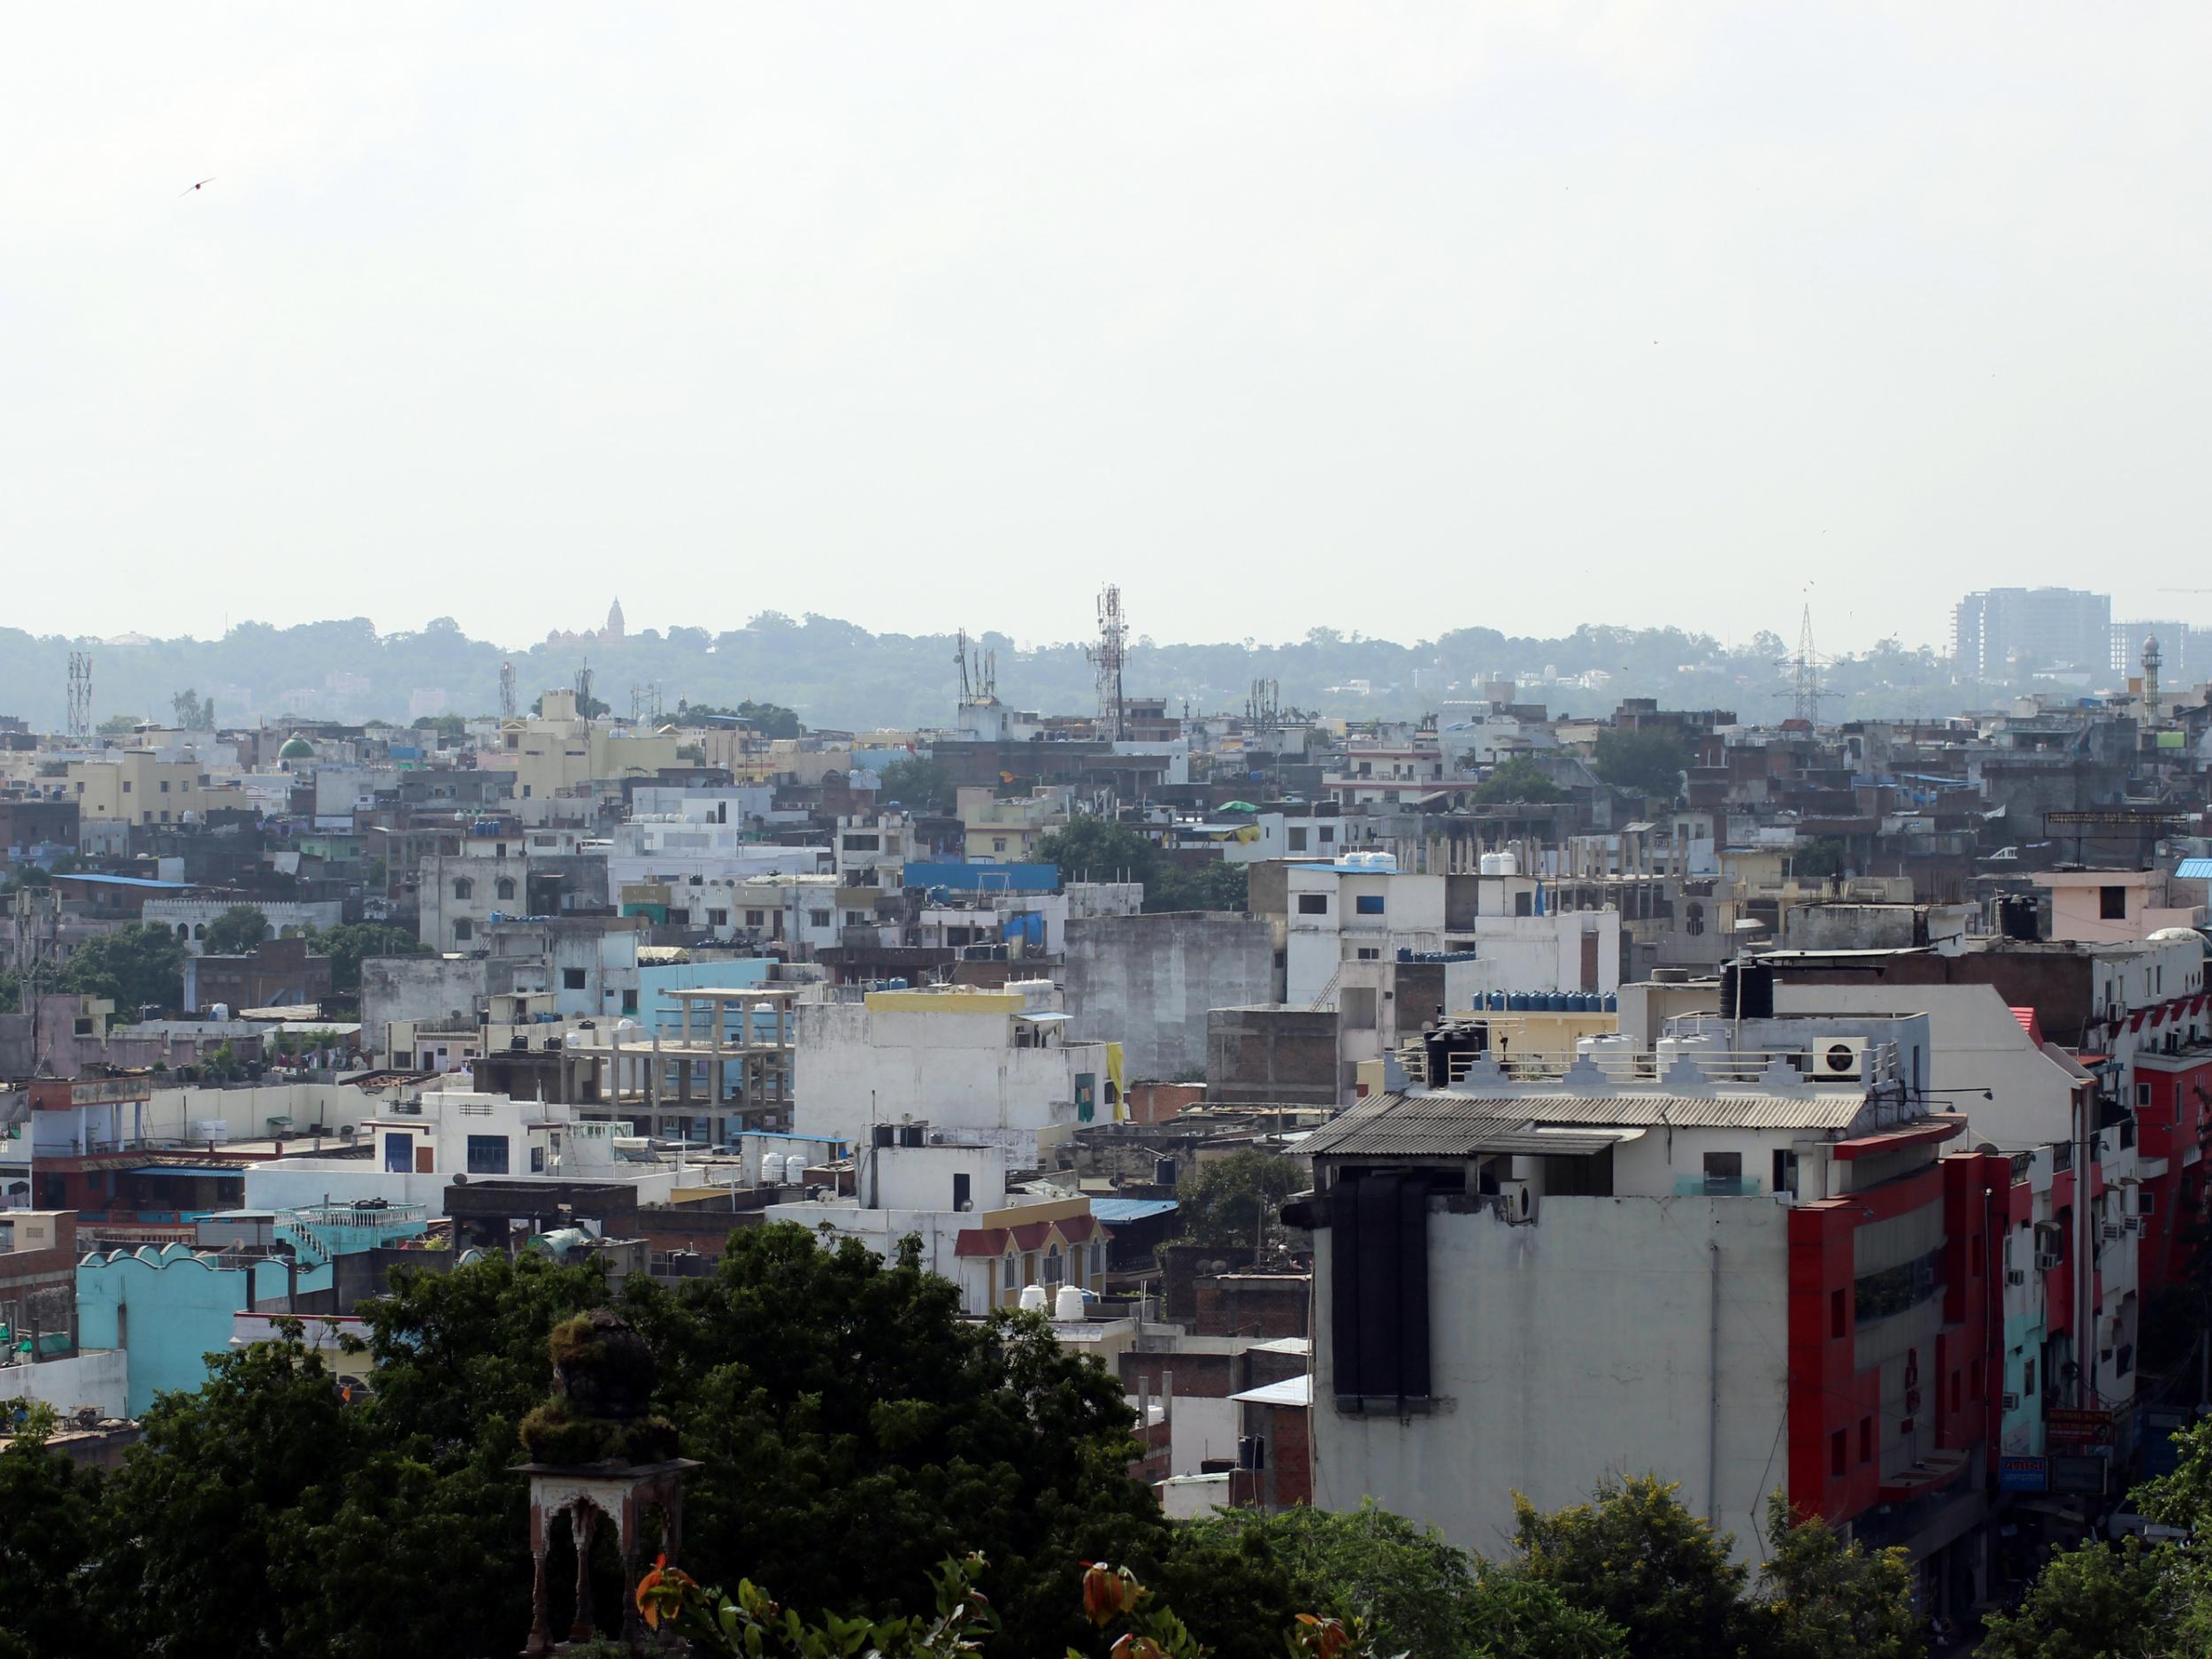 The city of Bhopal in India's Madhya Pradesh state